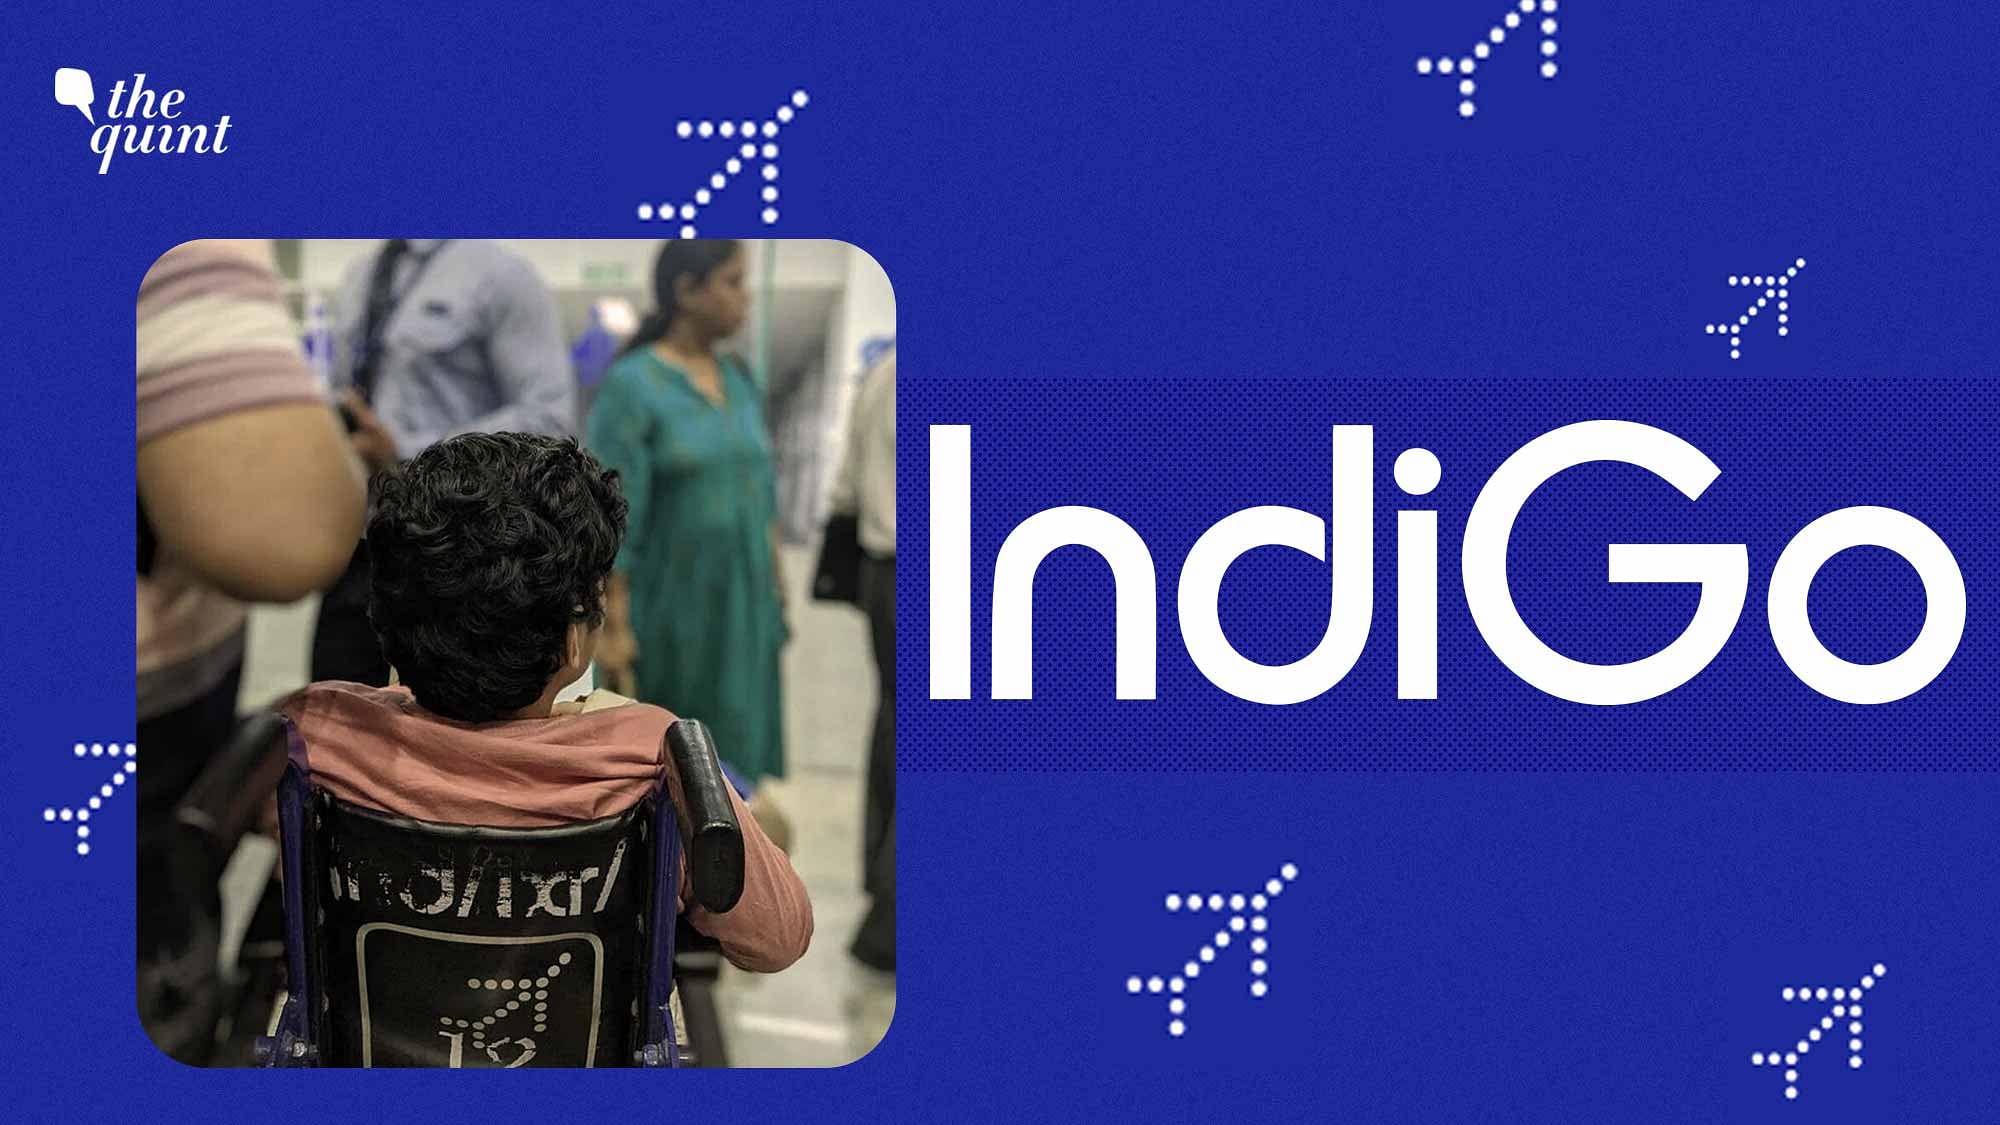 Screenshot of backview of child sitting on Indigo6E wheelchair. Ranchi Airport Indigo staff can be seen on the background surrounded by copassengers trying to reason with him. Image is against an Indigo blue background studded with the airline's logos.